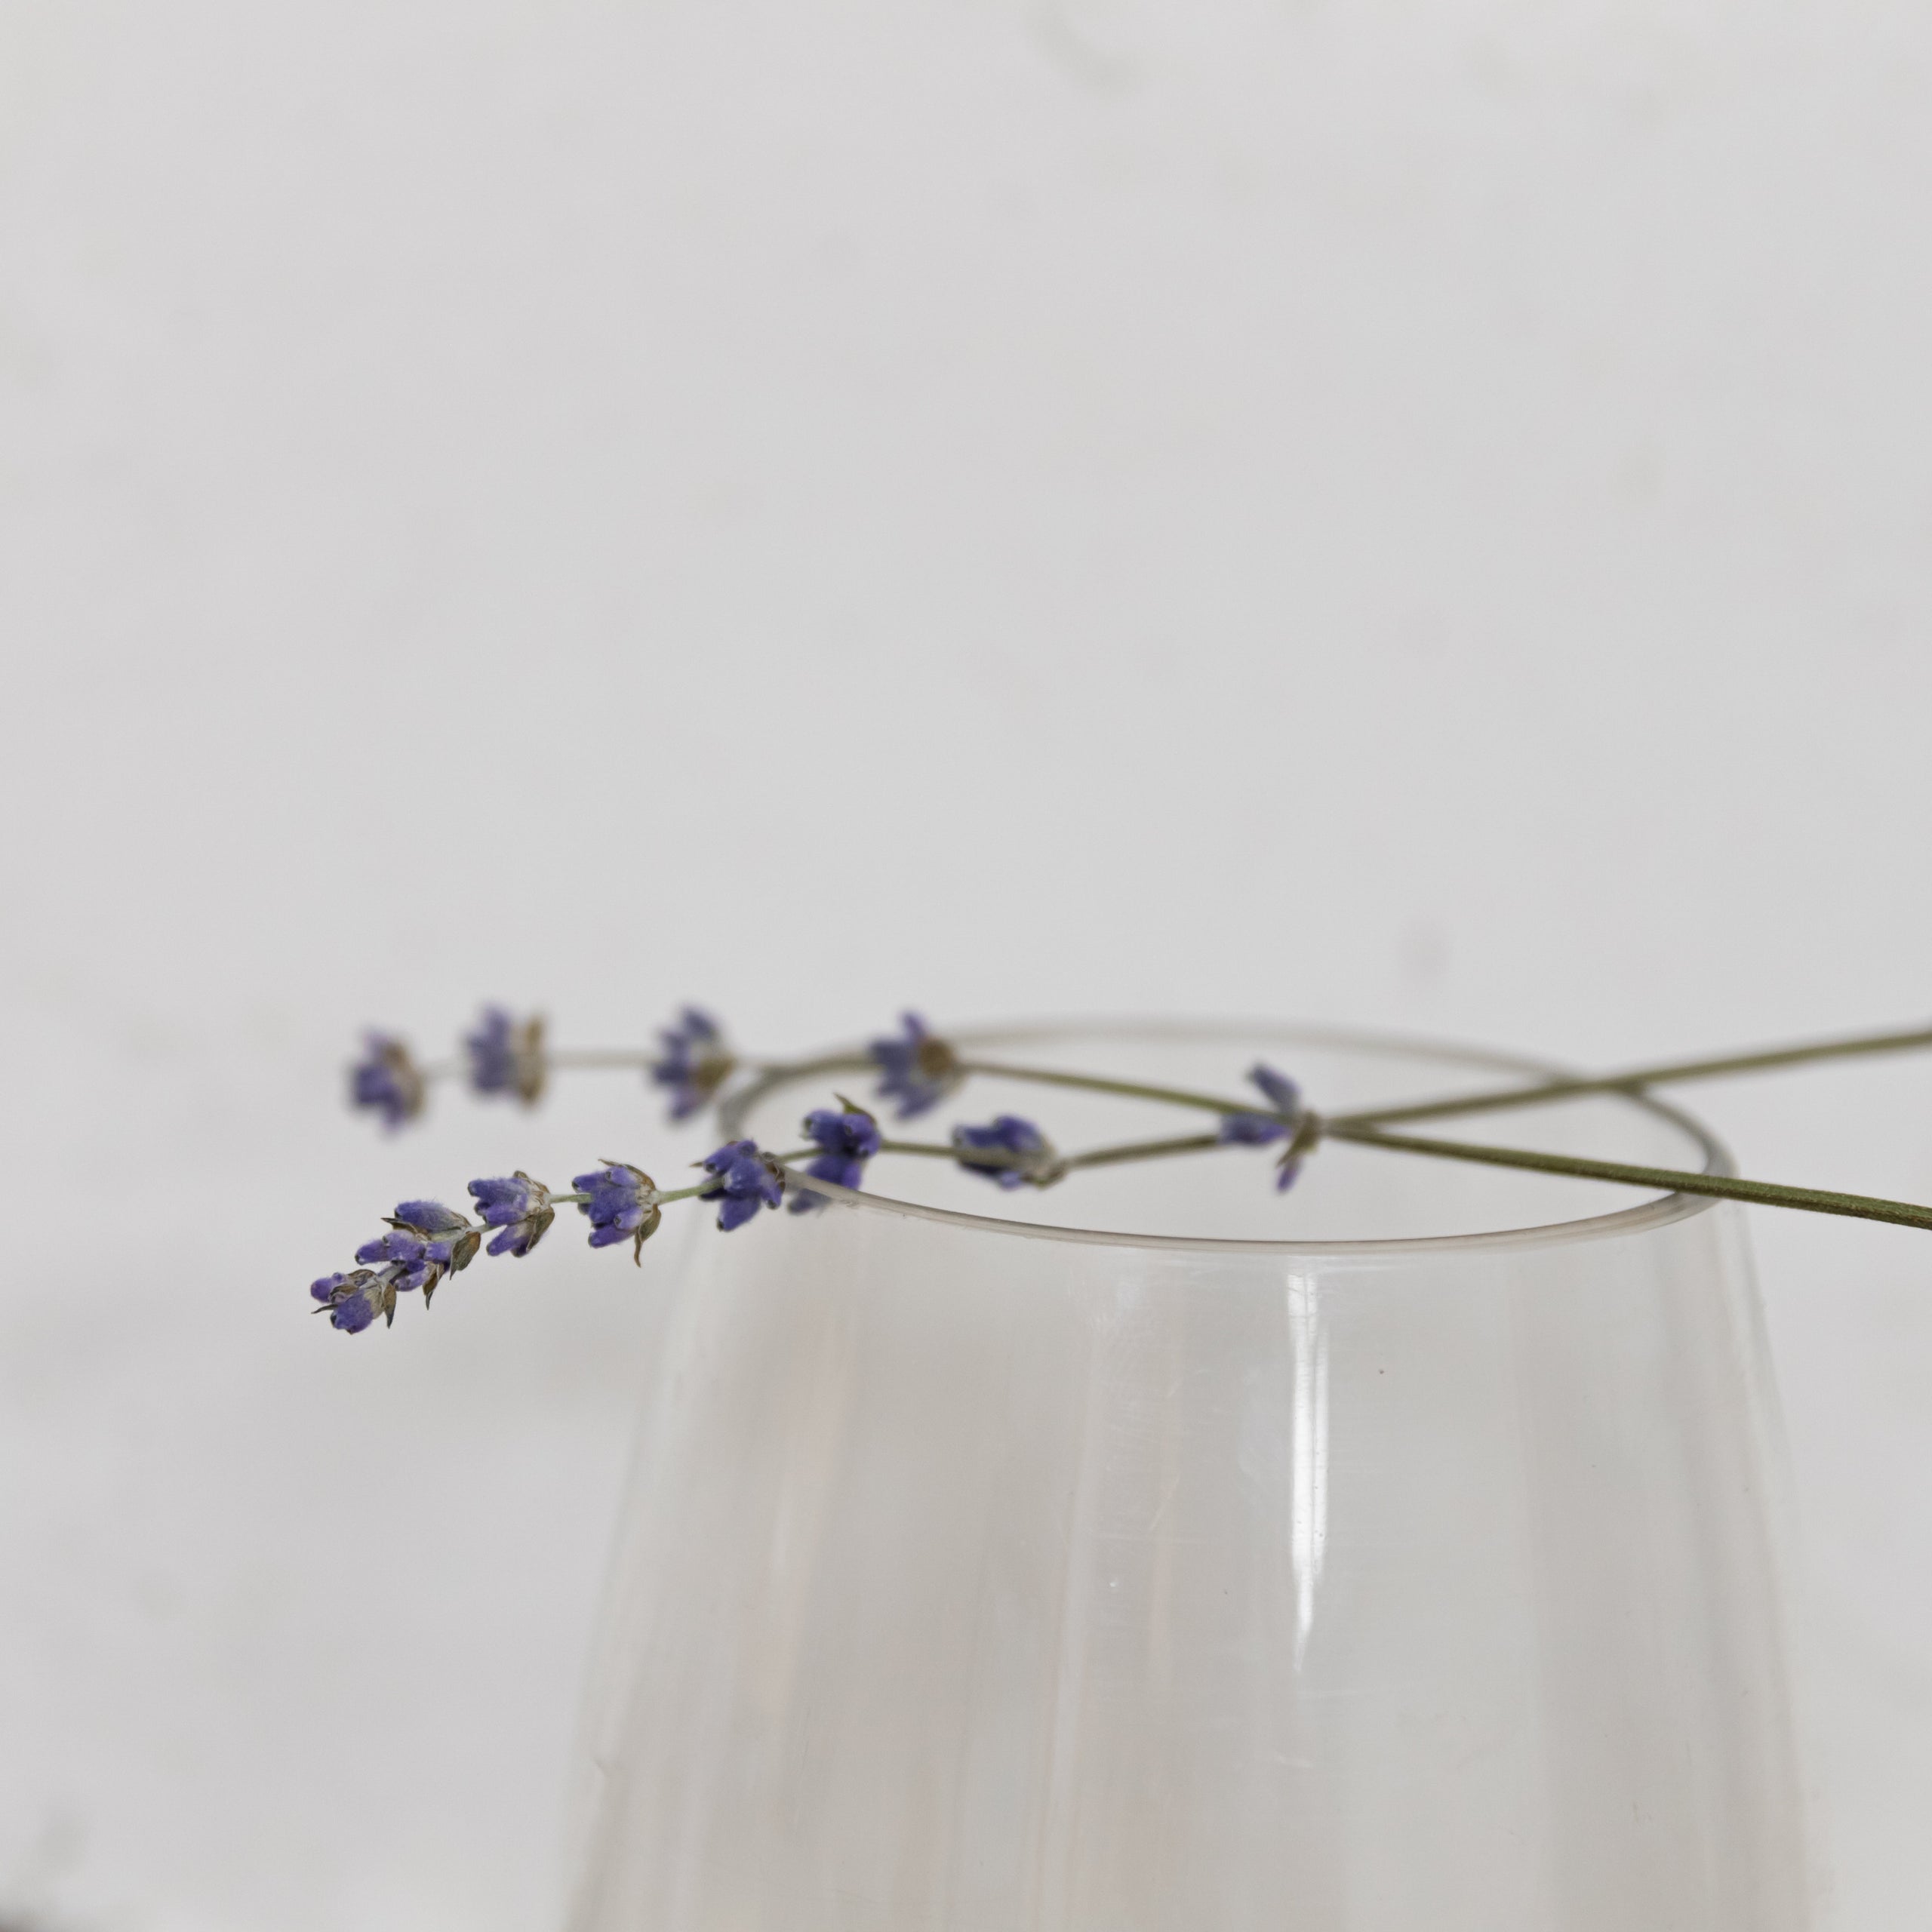 Lavender Kitchen Accessories - And Where to Find Them - PartyLookBook